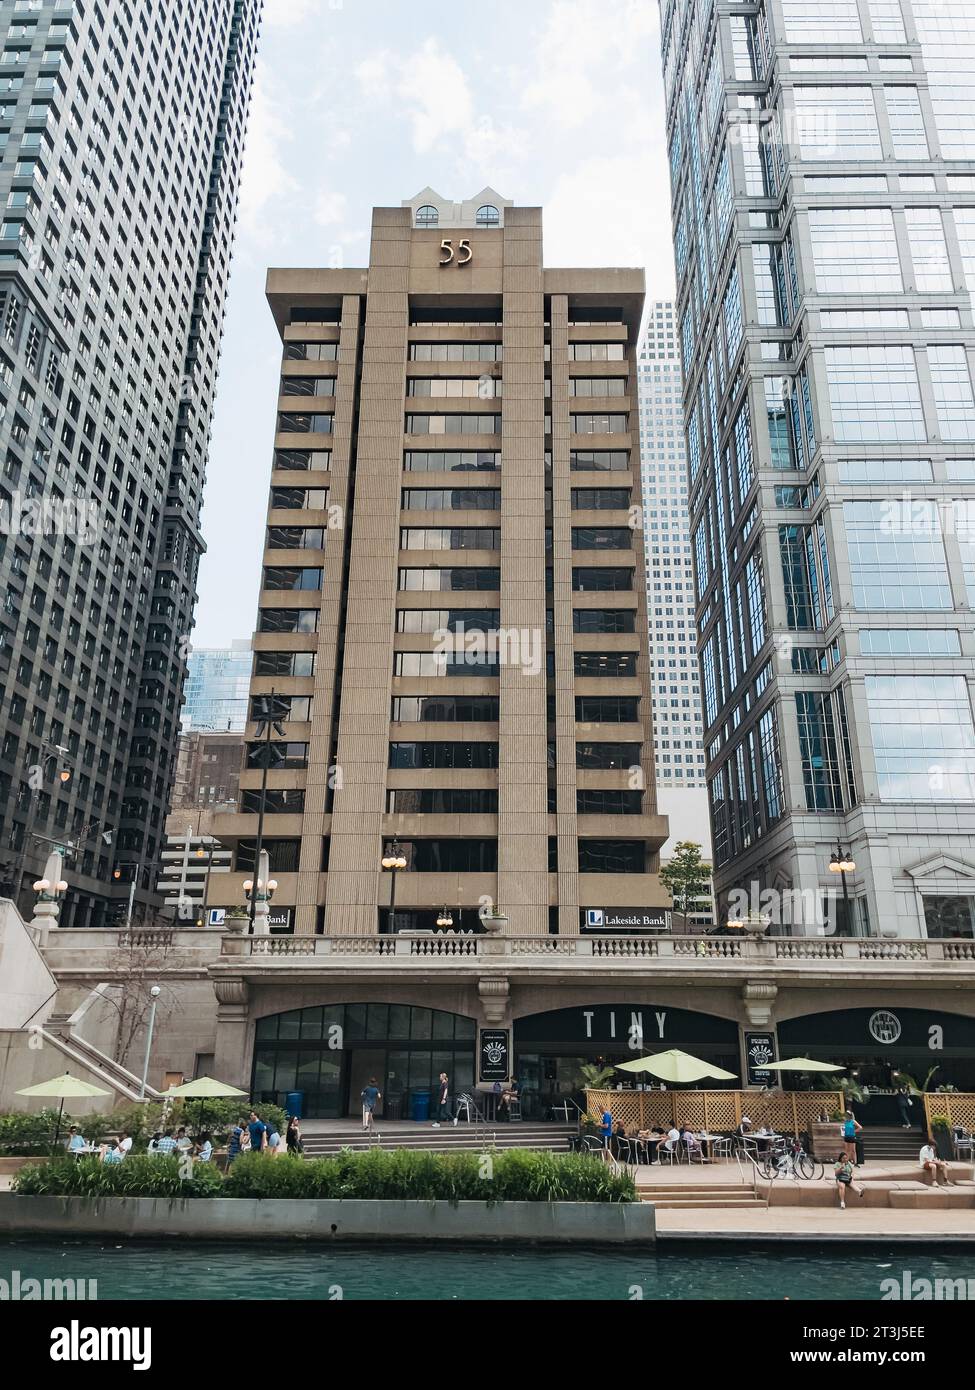 the Blue Cross-Blue Shield Building, located at 55 W. Wacker Drive, Chicago. Completed in 1968 Stock Photo